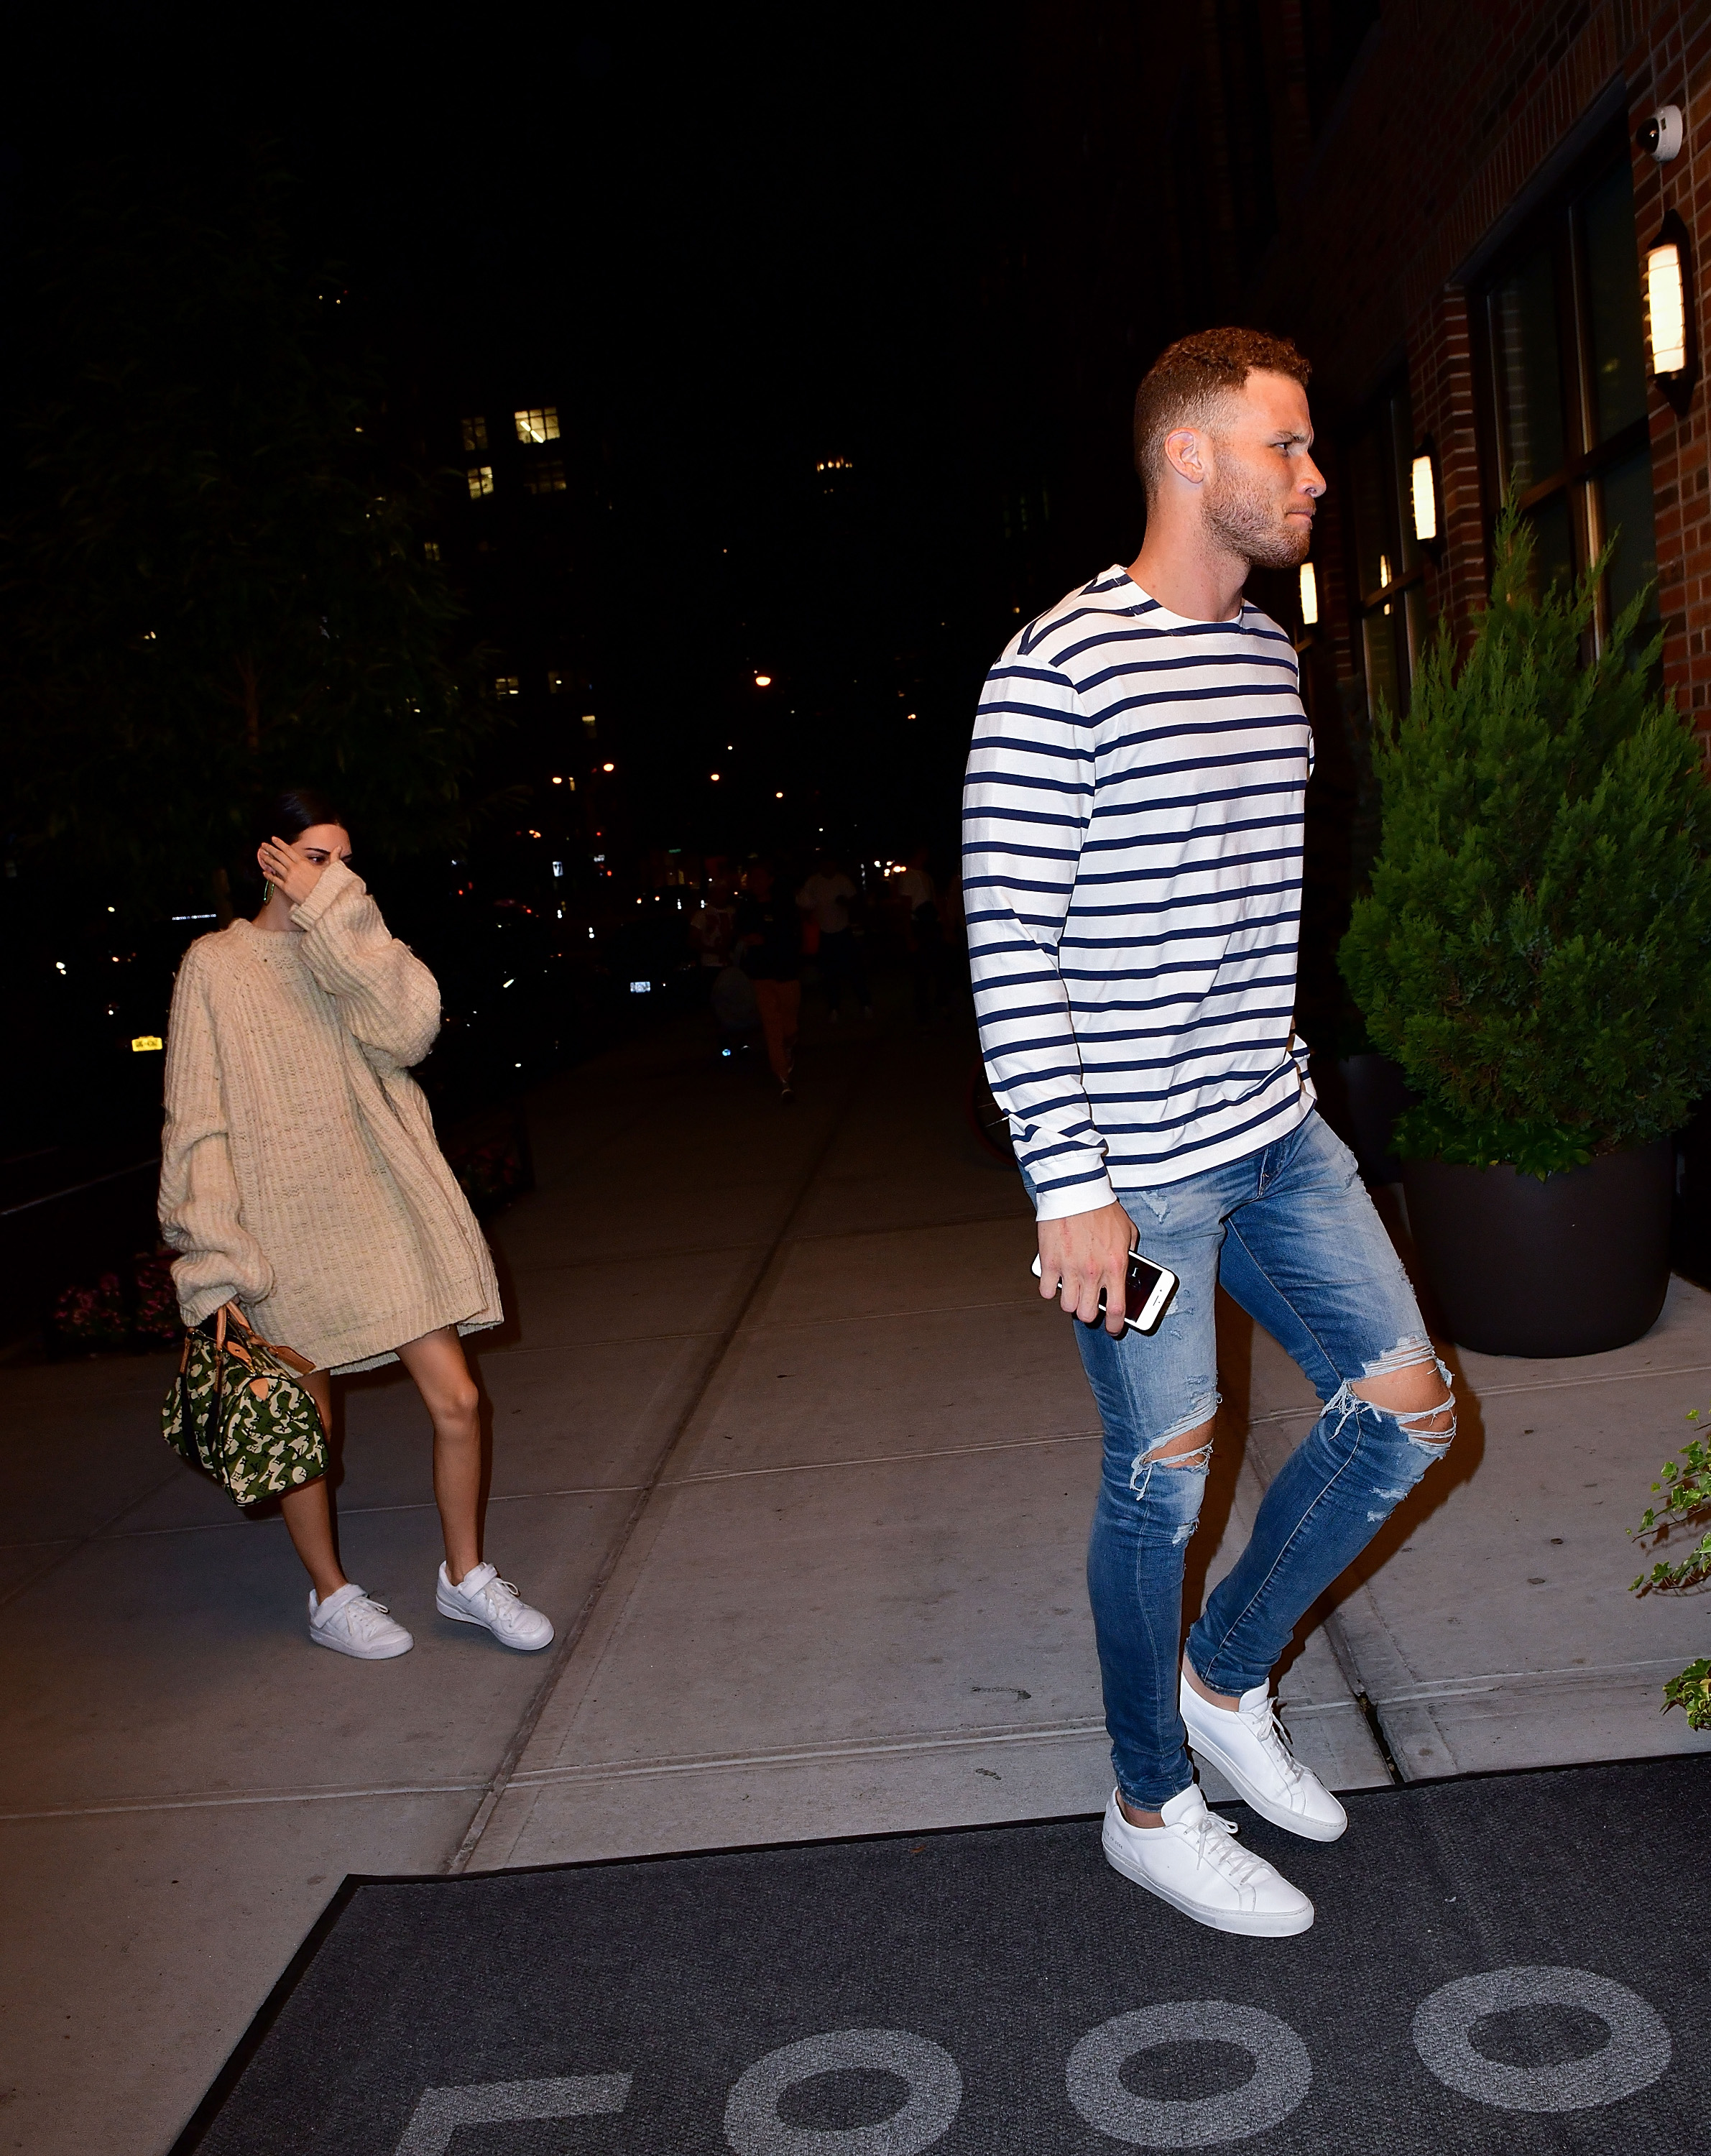 Kendall Jenner Joins Blake Griffin for Night Out in NYC: Photo